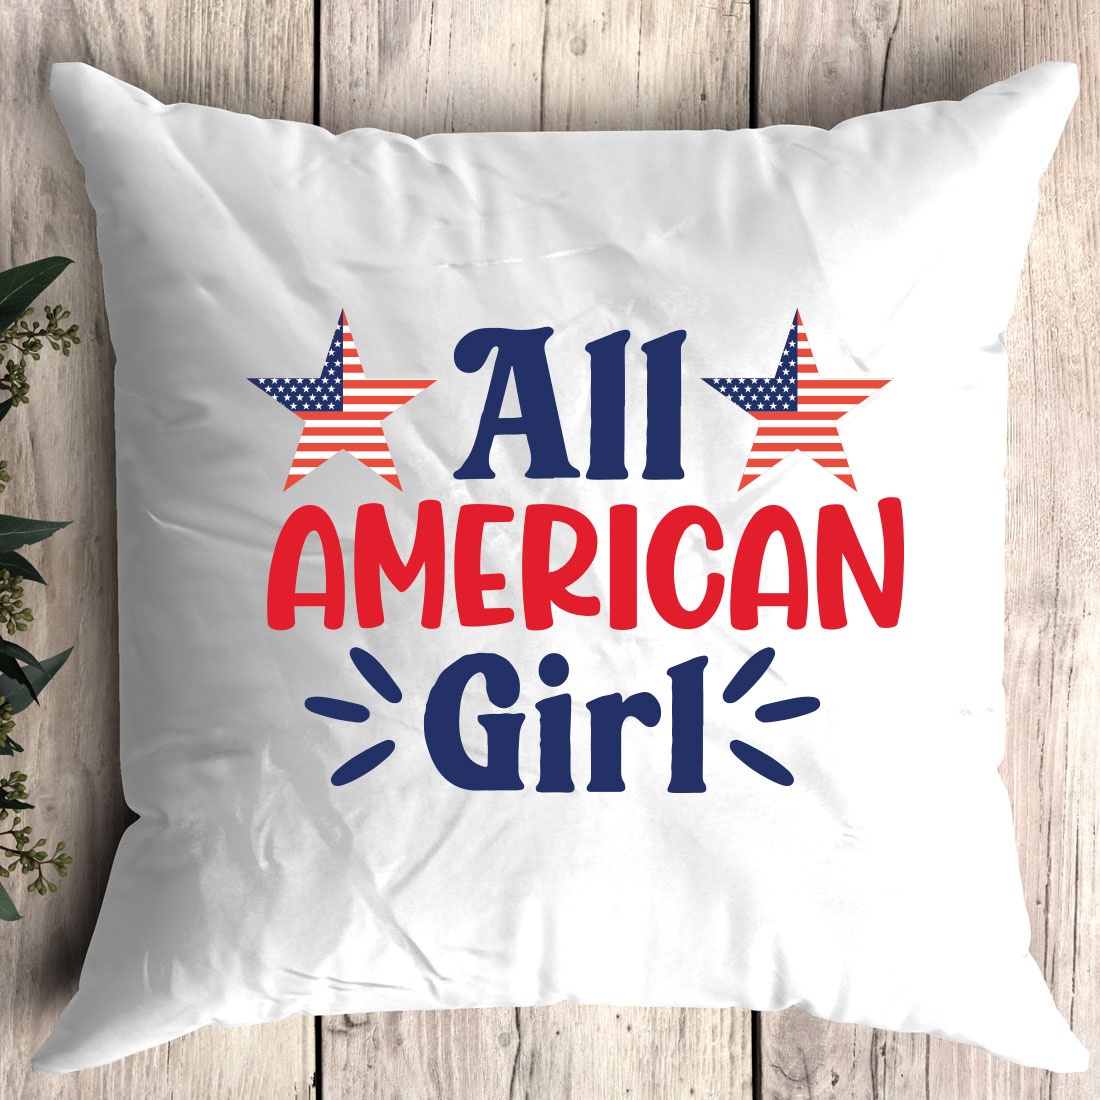 Pillow with the words all american girl on it.